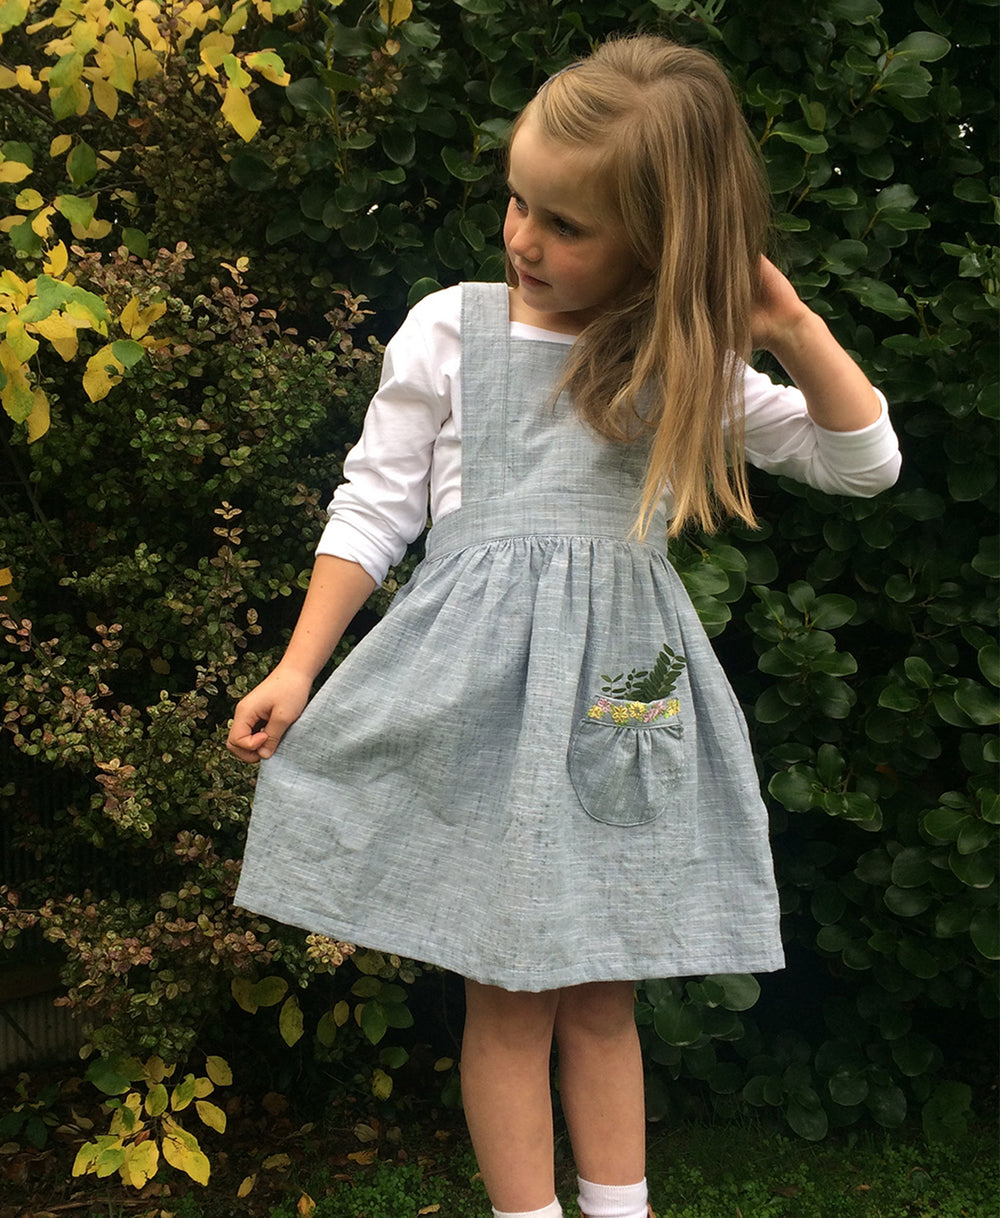 Child wearing the Baby/Child Tui Pinafore sewing pattern by Below the Kowhai. A pinafore dress pattern made in light to medium weight cotton, chambray, light denims, linen, corduroy or velvet fabrics, featuring an elastic back waistband, fully lined bodic